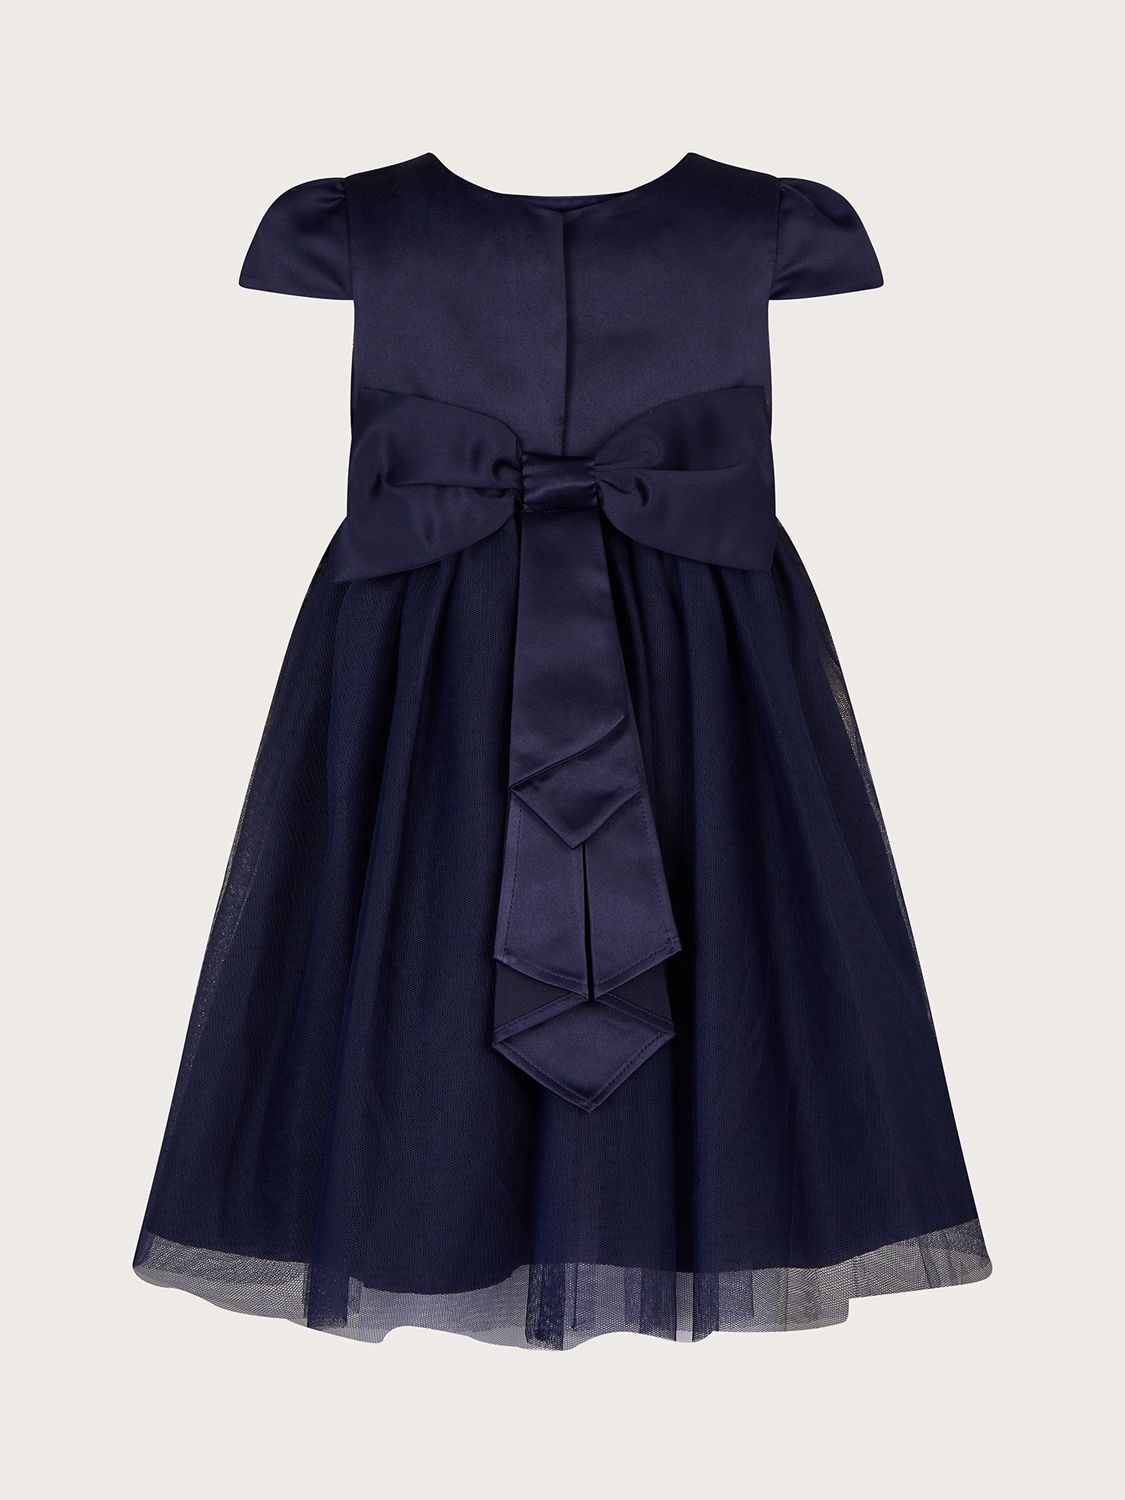 Buy Monsoon Baby Tulle Bridesmaid Dress, Navy Online at johnlewis.com